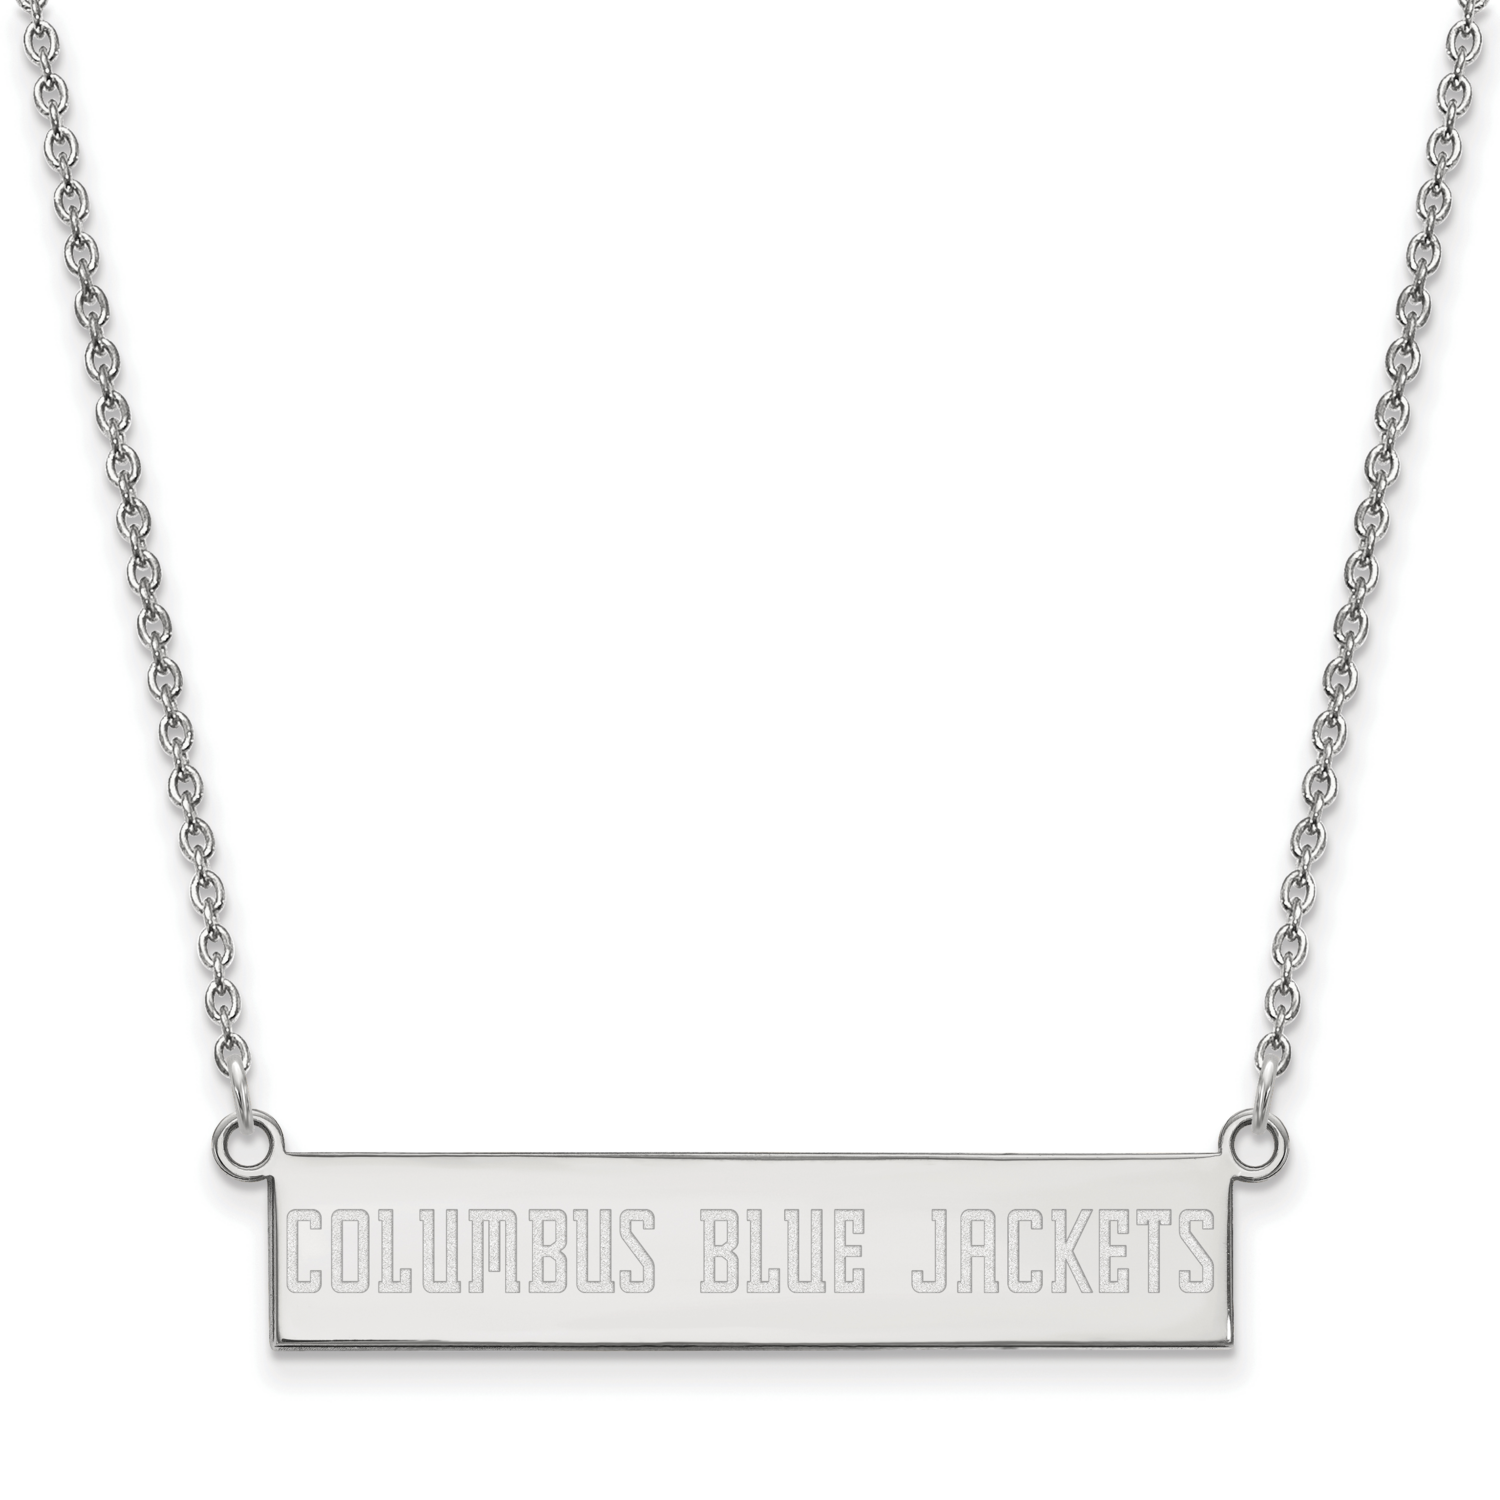 Columbus Blue Jackets Small Bar Necklace Sterling Silver Rhodium-plated SS016BJA-18